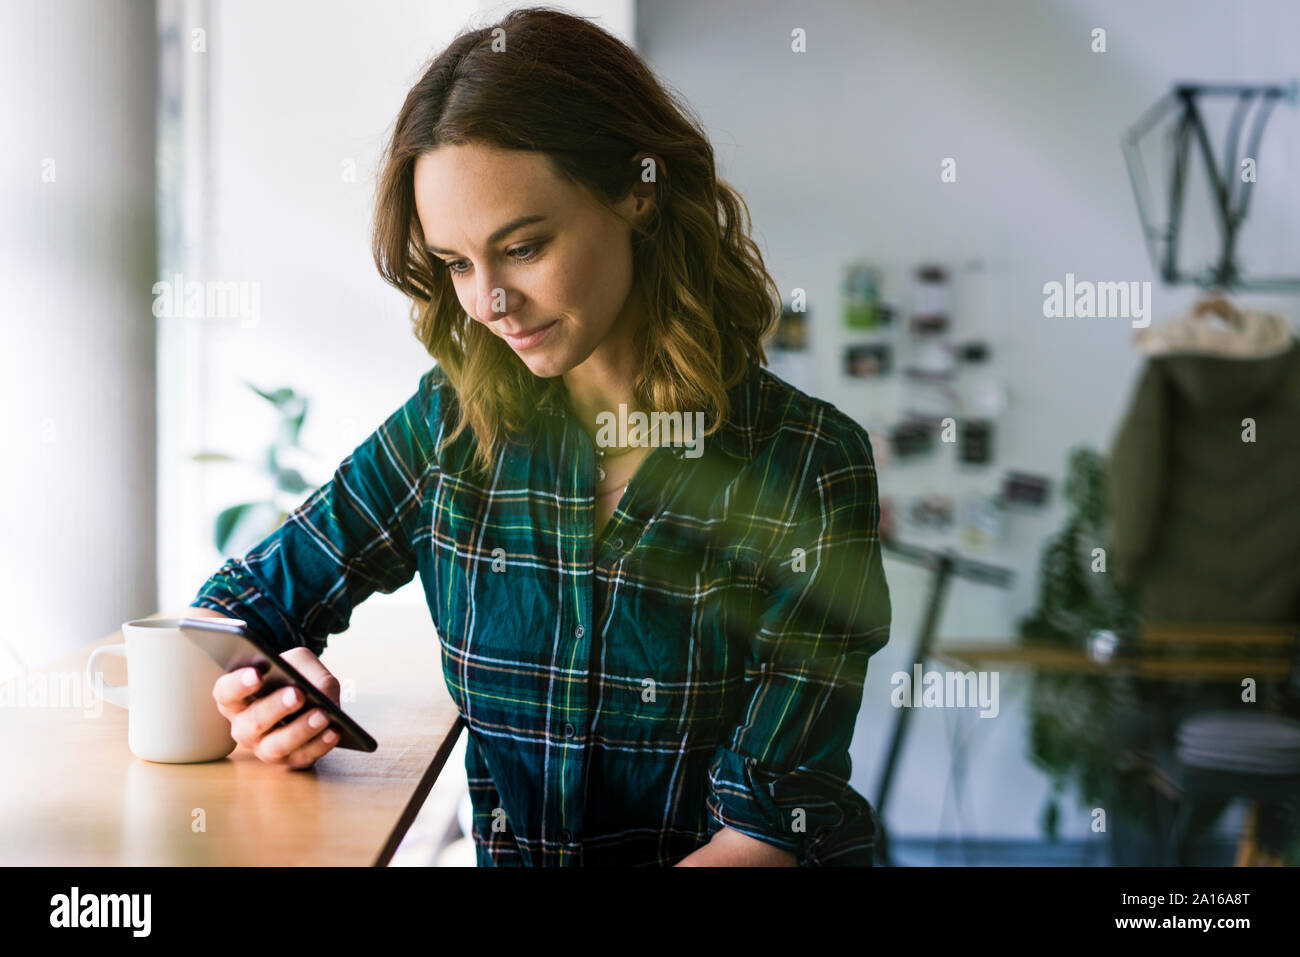 Young woman sitting in coffee shop, using smartphone Stock Photo